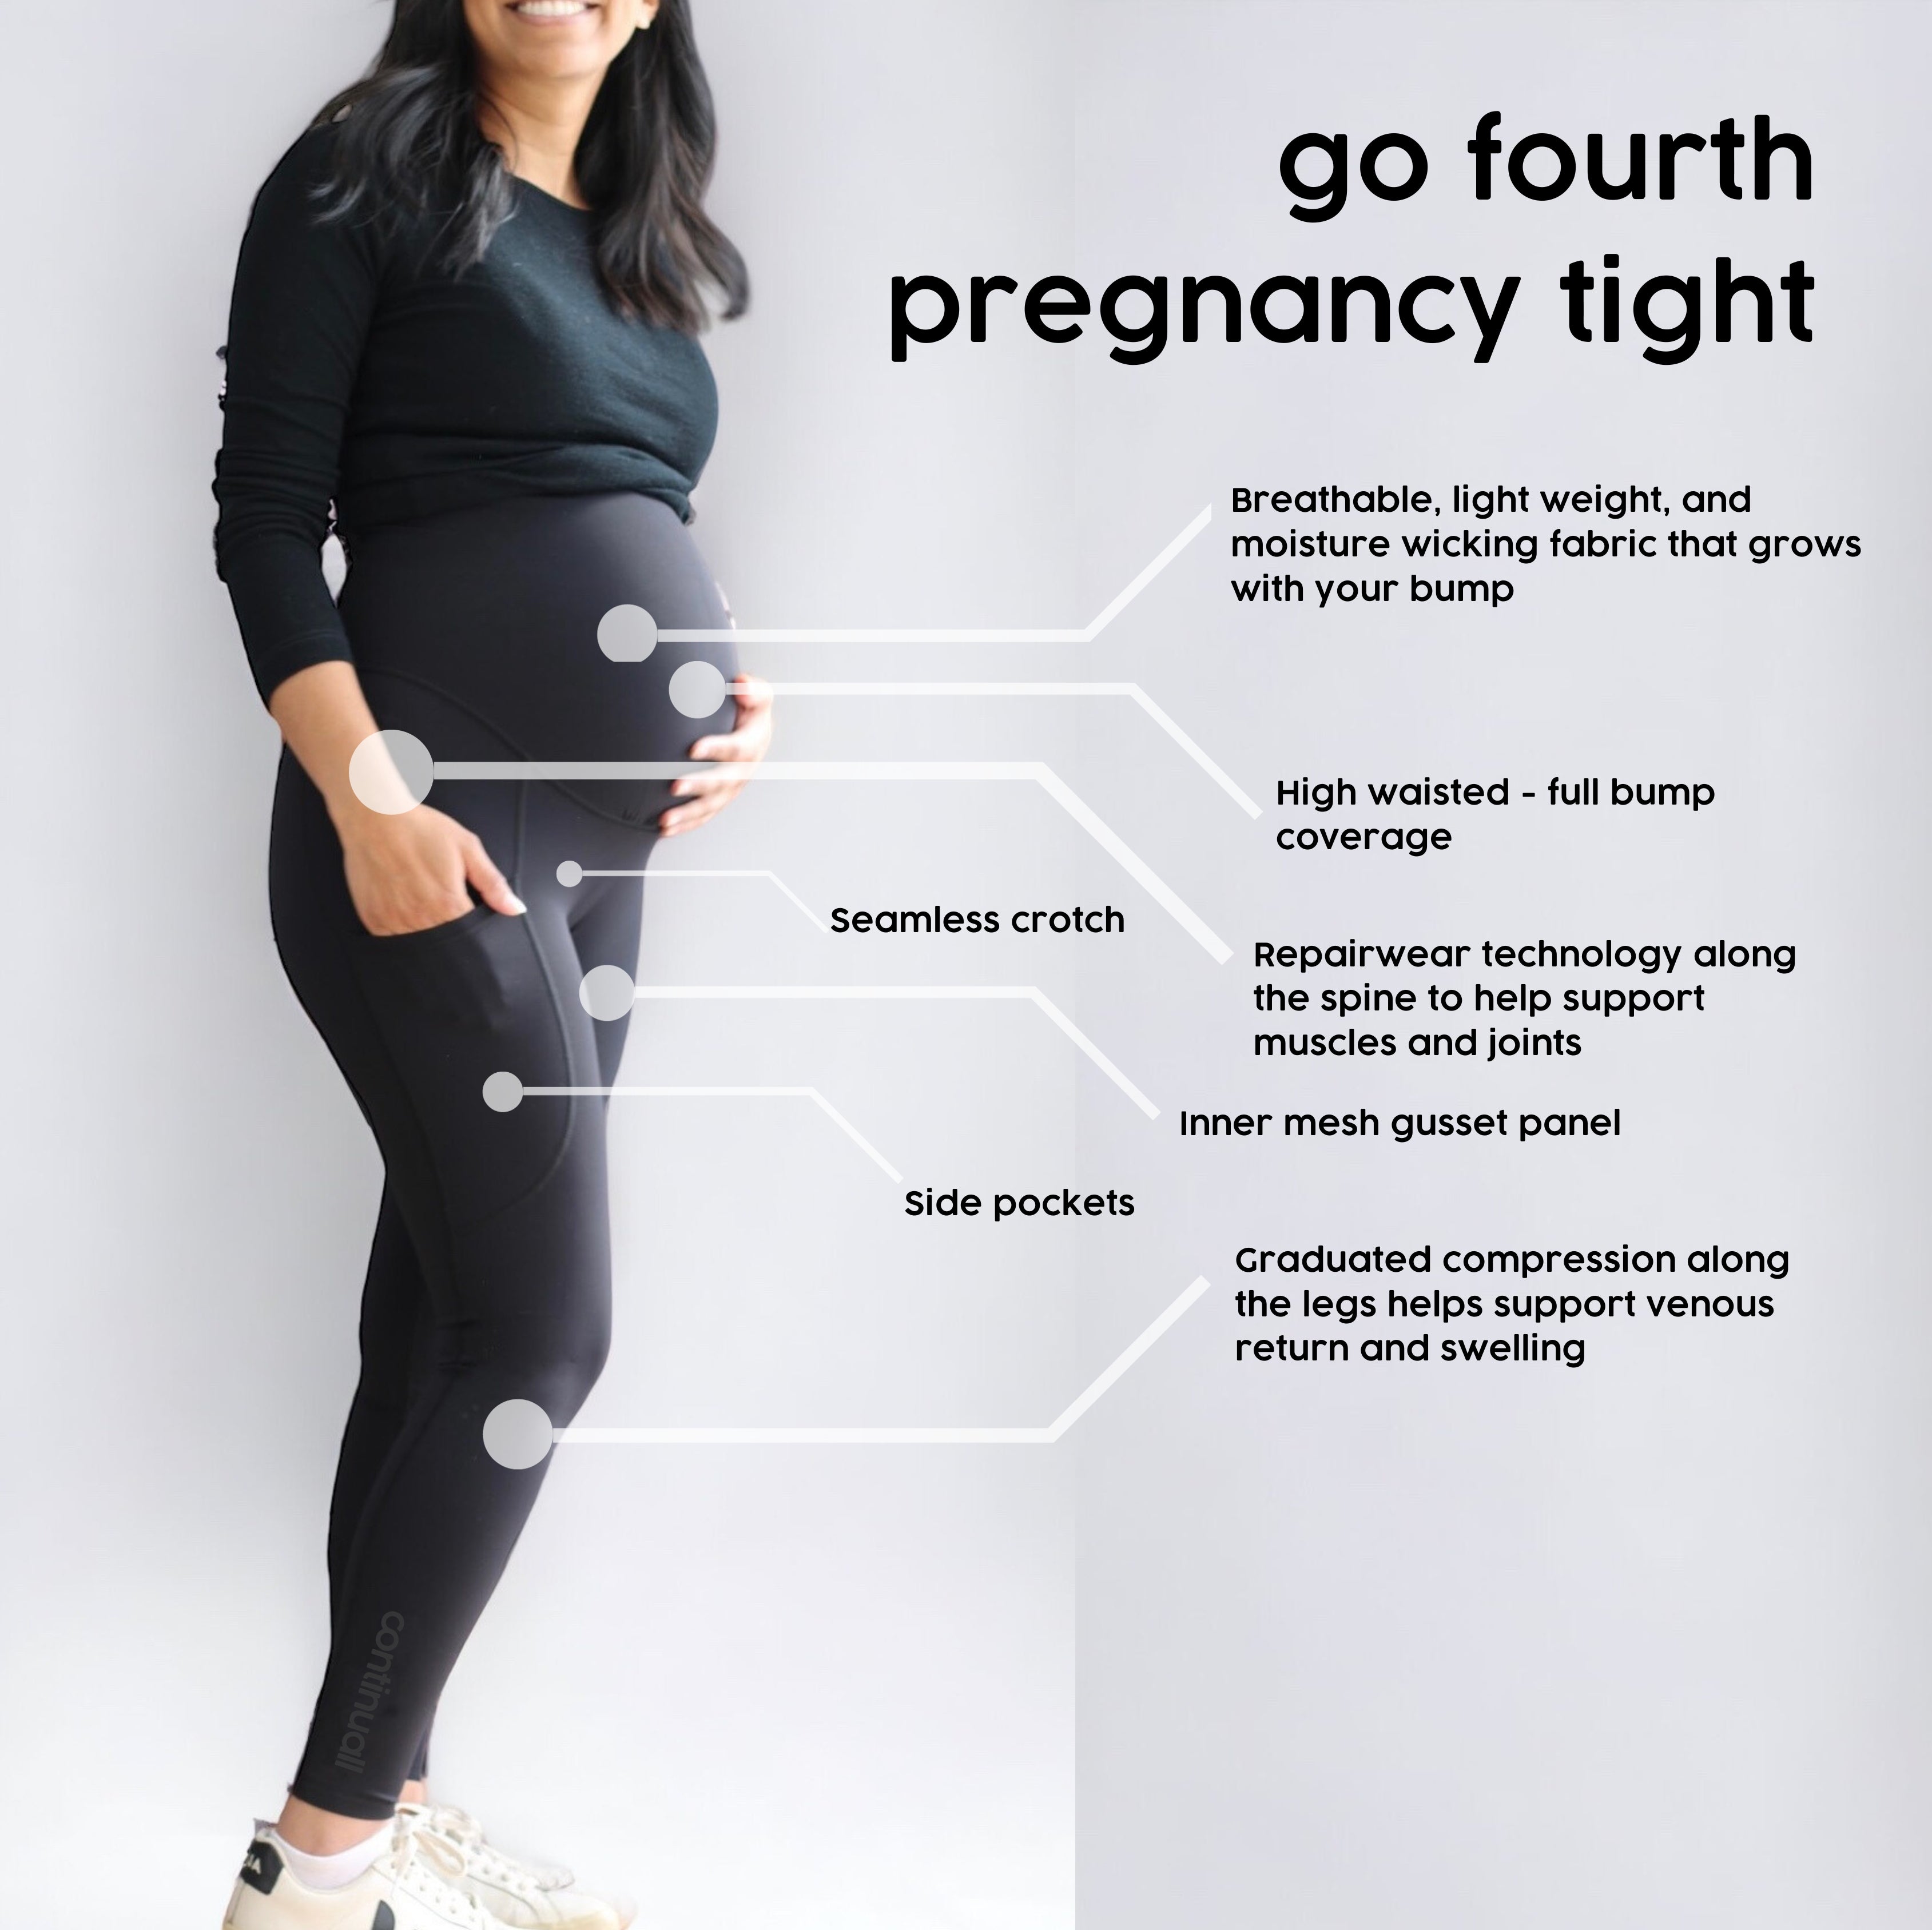 Why wearing tight clothes in pregnancy isn't worth the trouble -Physicians  - Healthwise